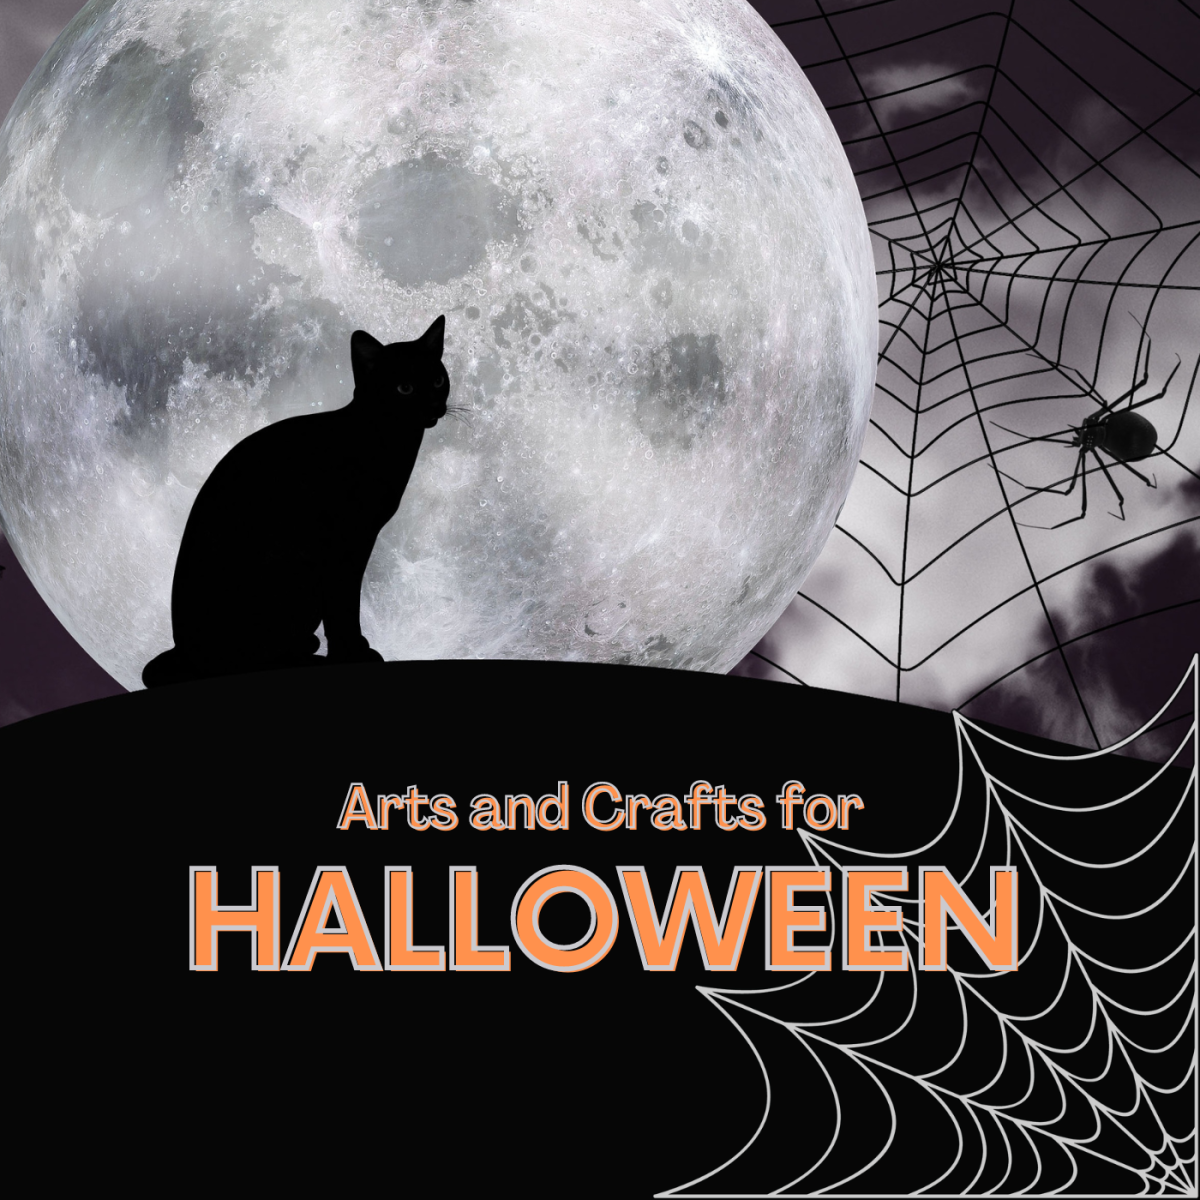 Here are 46 different arts and crafts projects to do during Halloween time. 